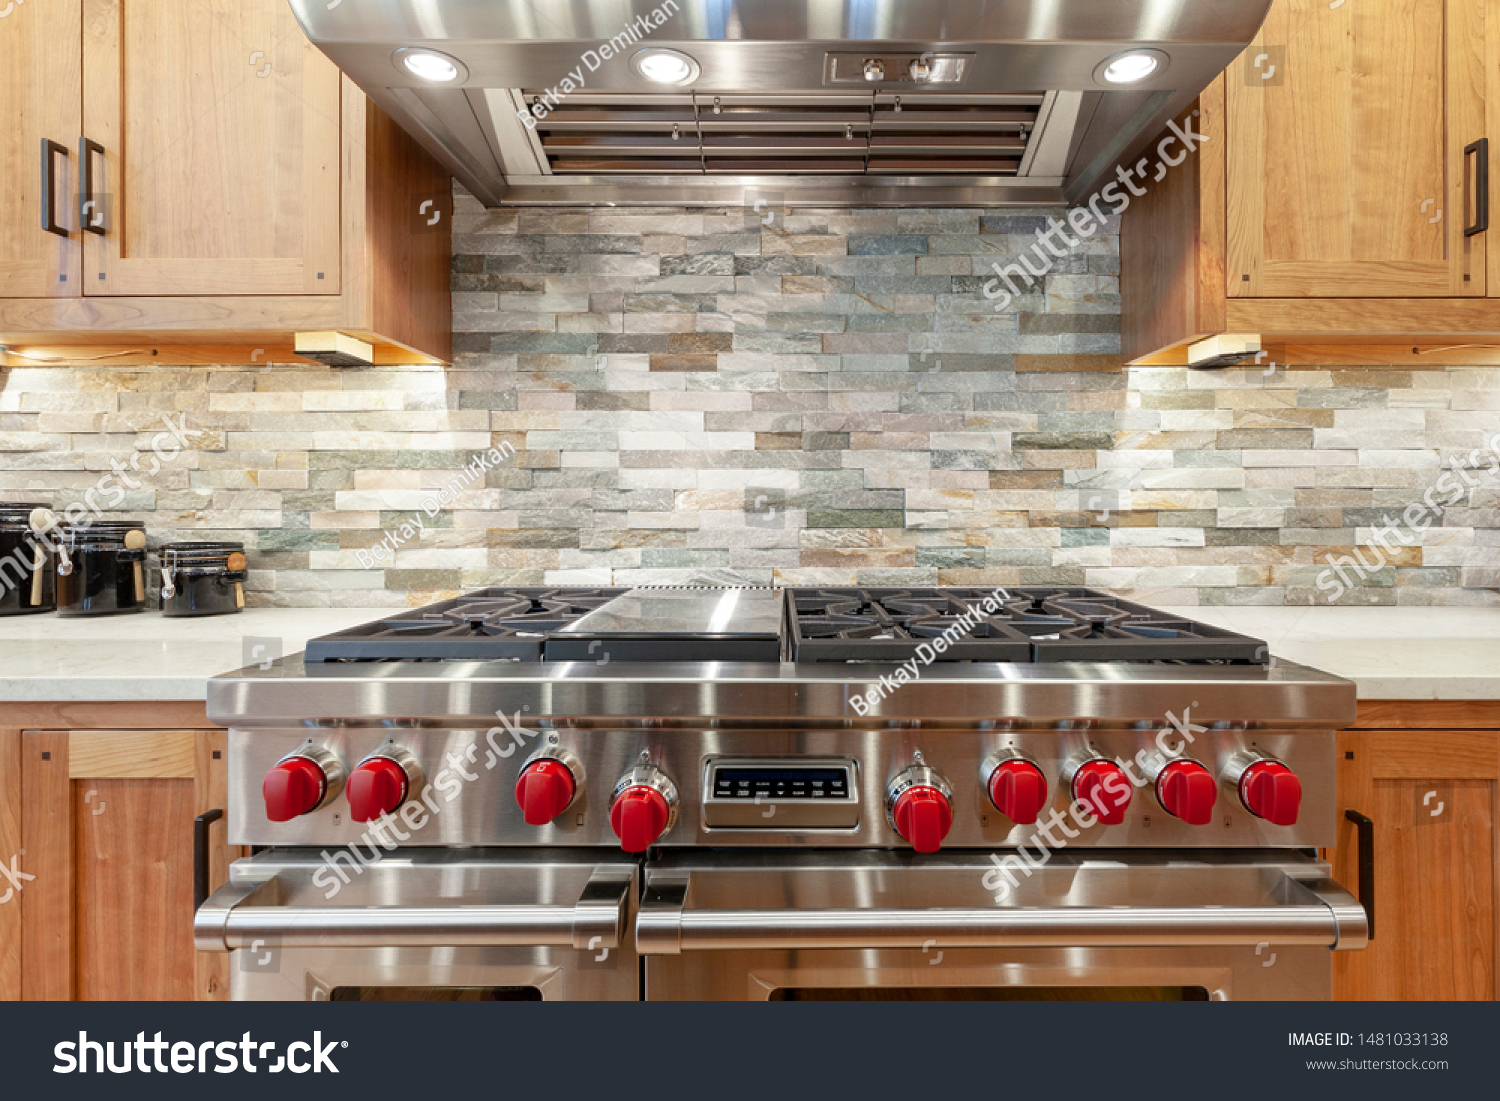 Stainless steel oven and stove with red knobs, stainless steel hood, brown kitchen cabinets, slate mosaic backsplash, natural stone, black jars #1481033138